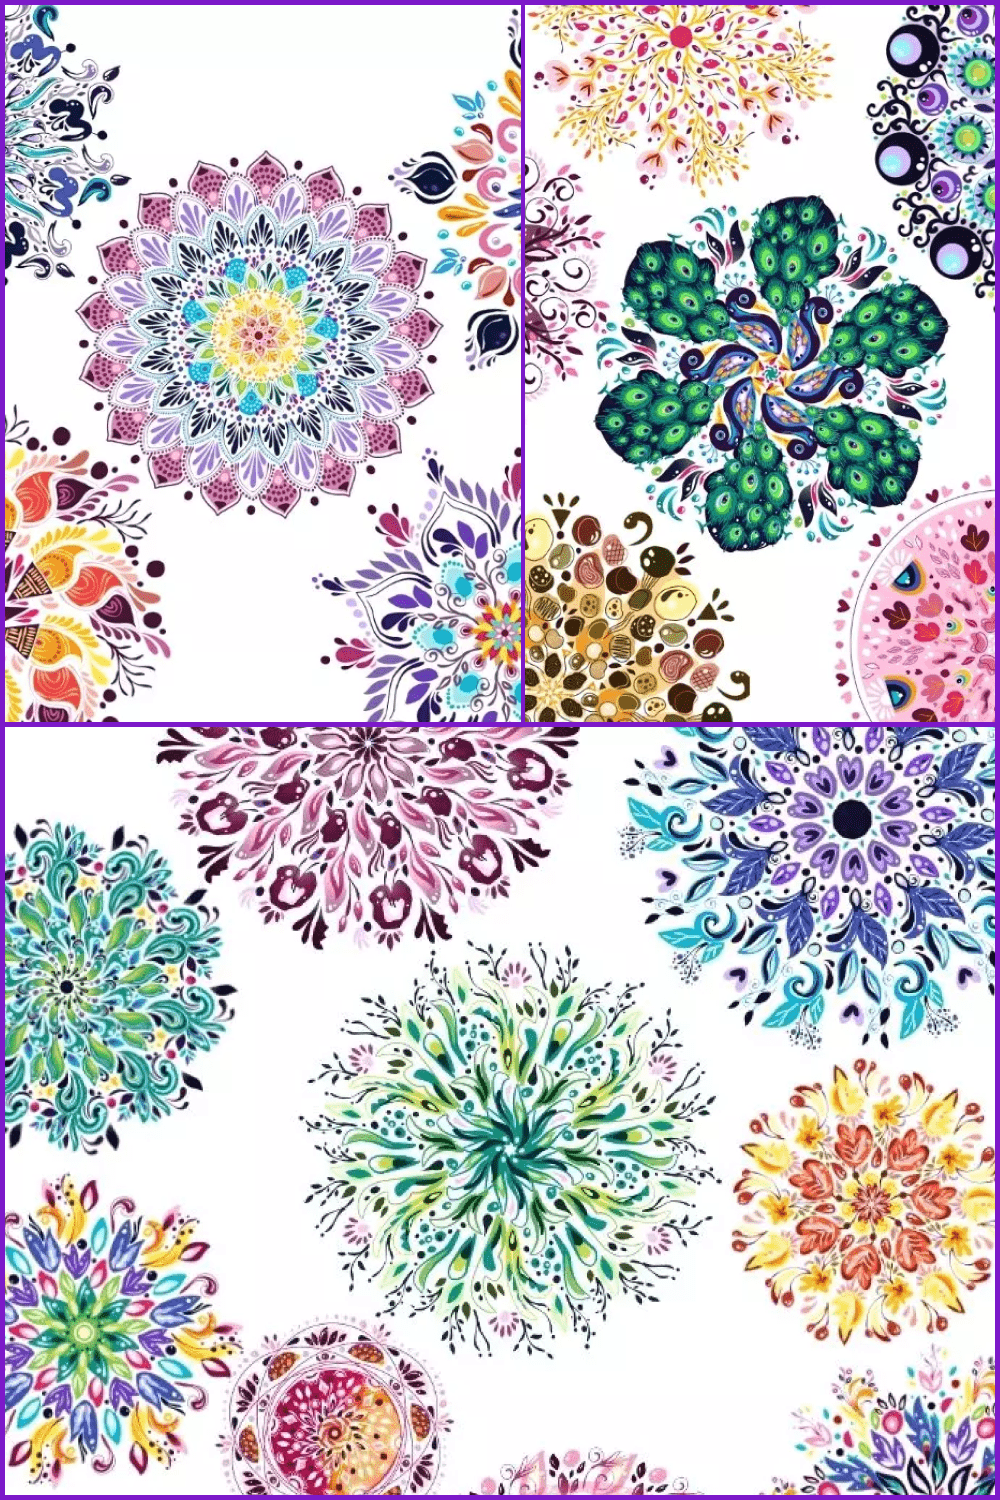 Collage with colorfull mandalas.